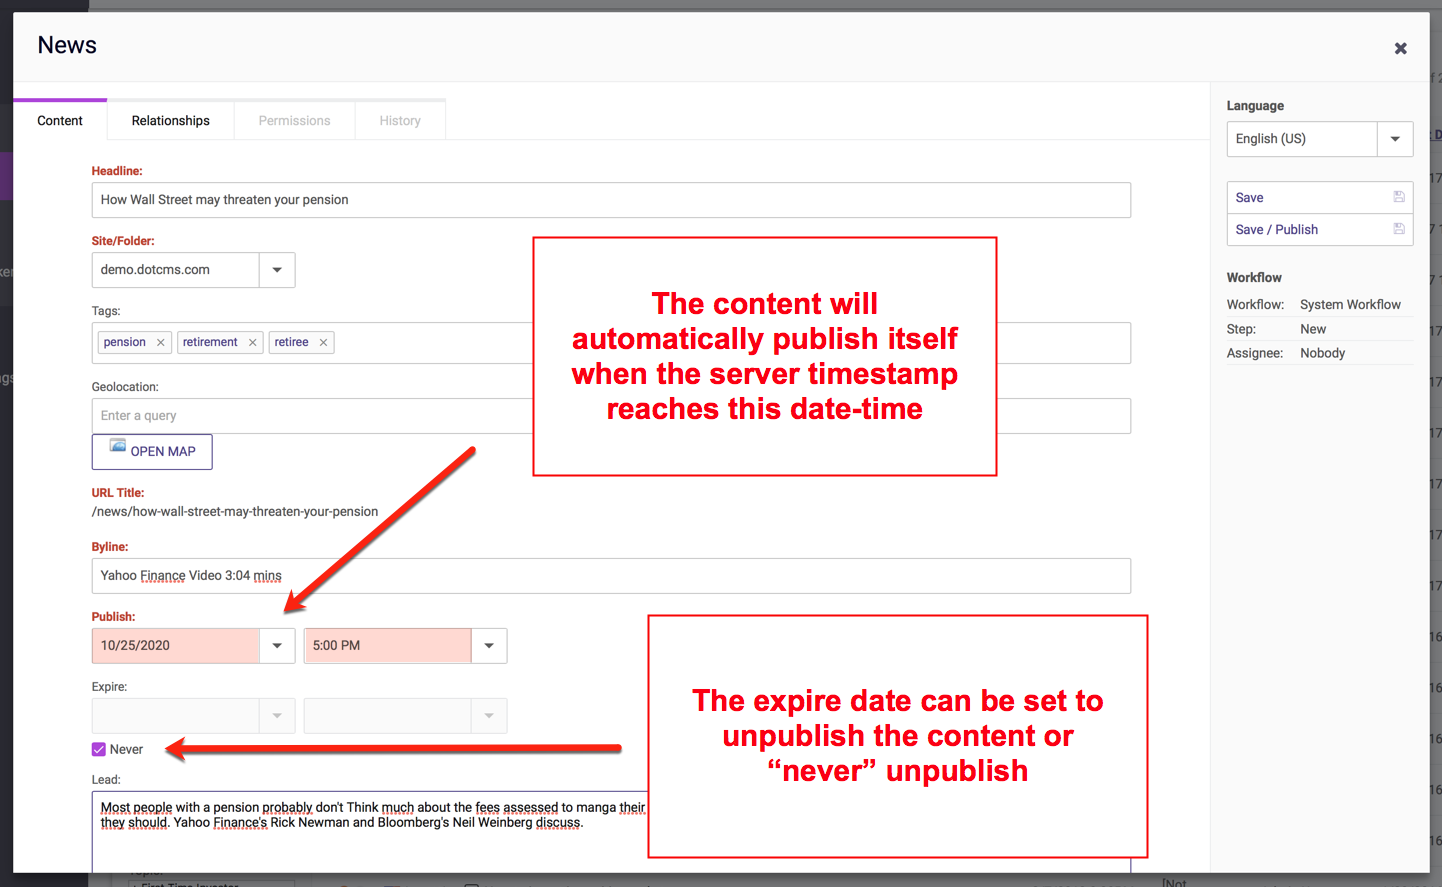 Publish date will Publish automatically the current piece of content on that given date and Expire date will Unpublish the current piece of content on that selected date.